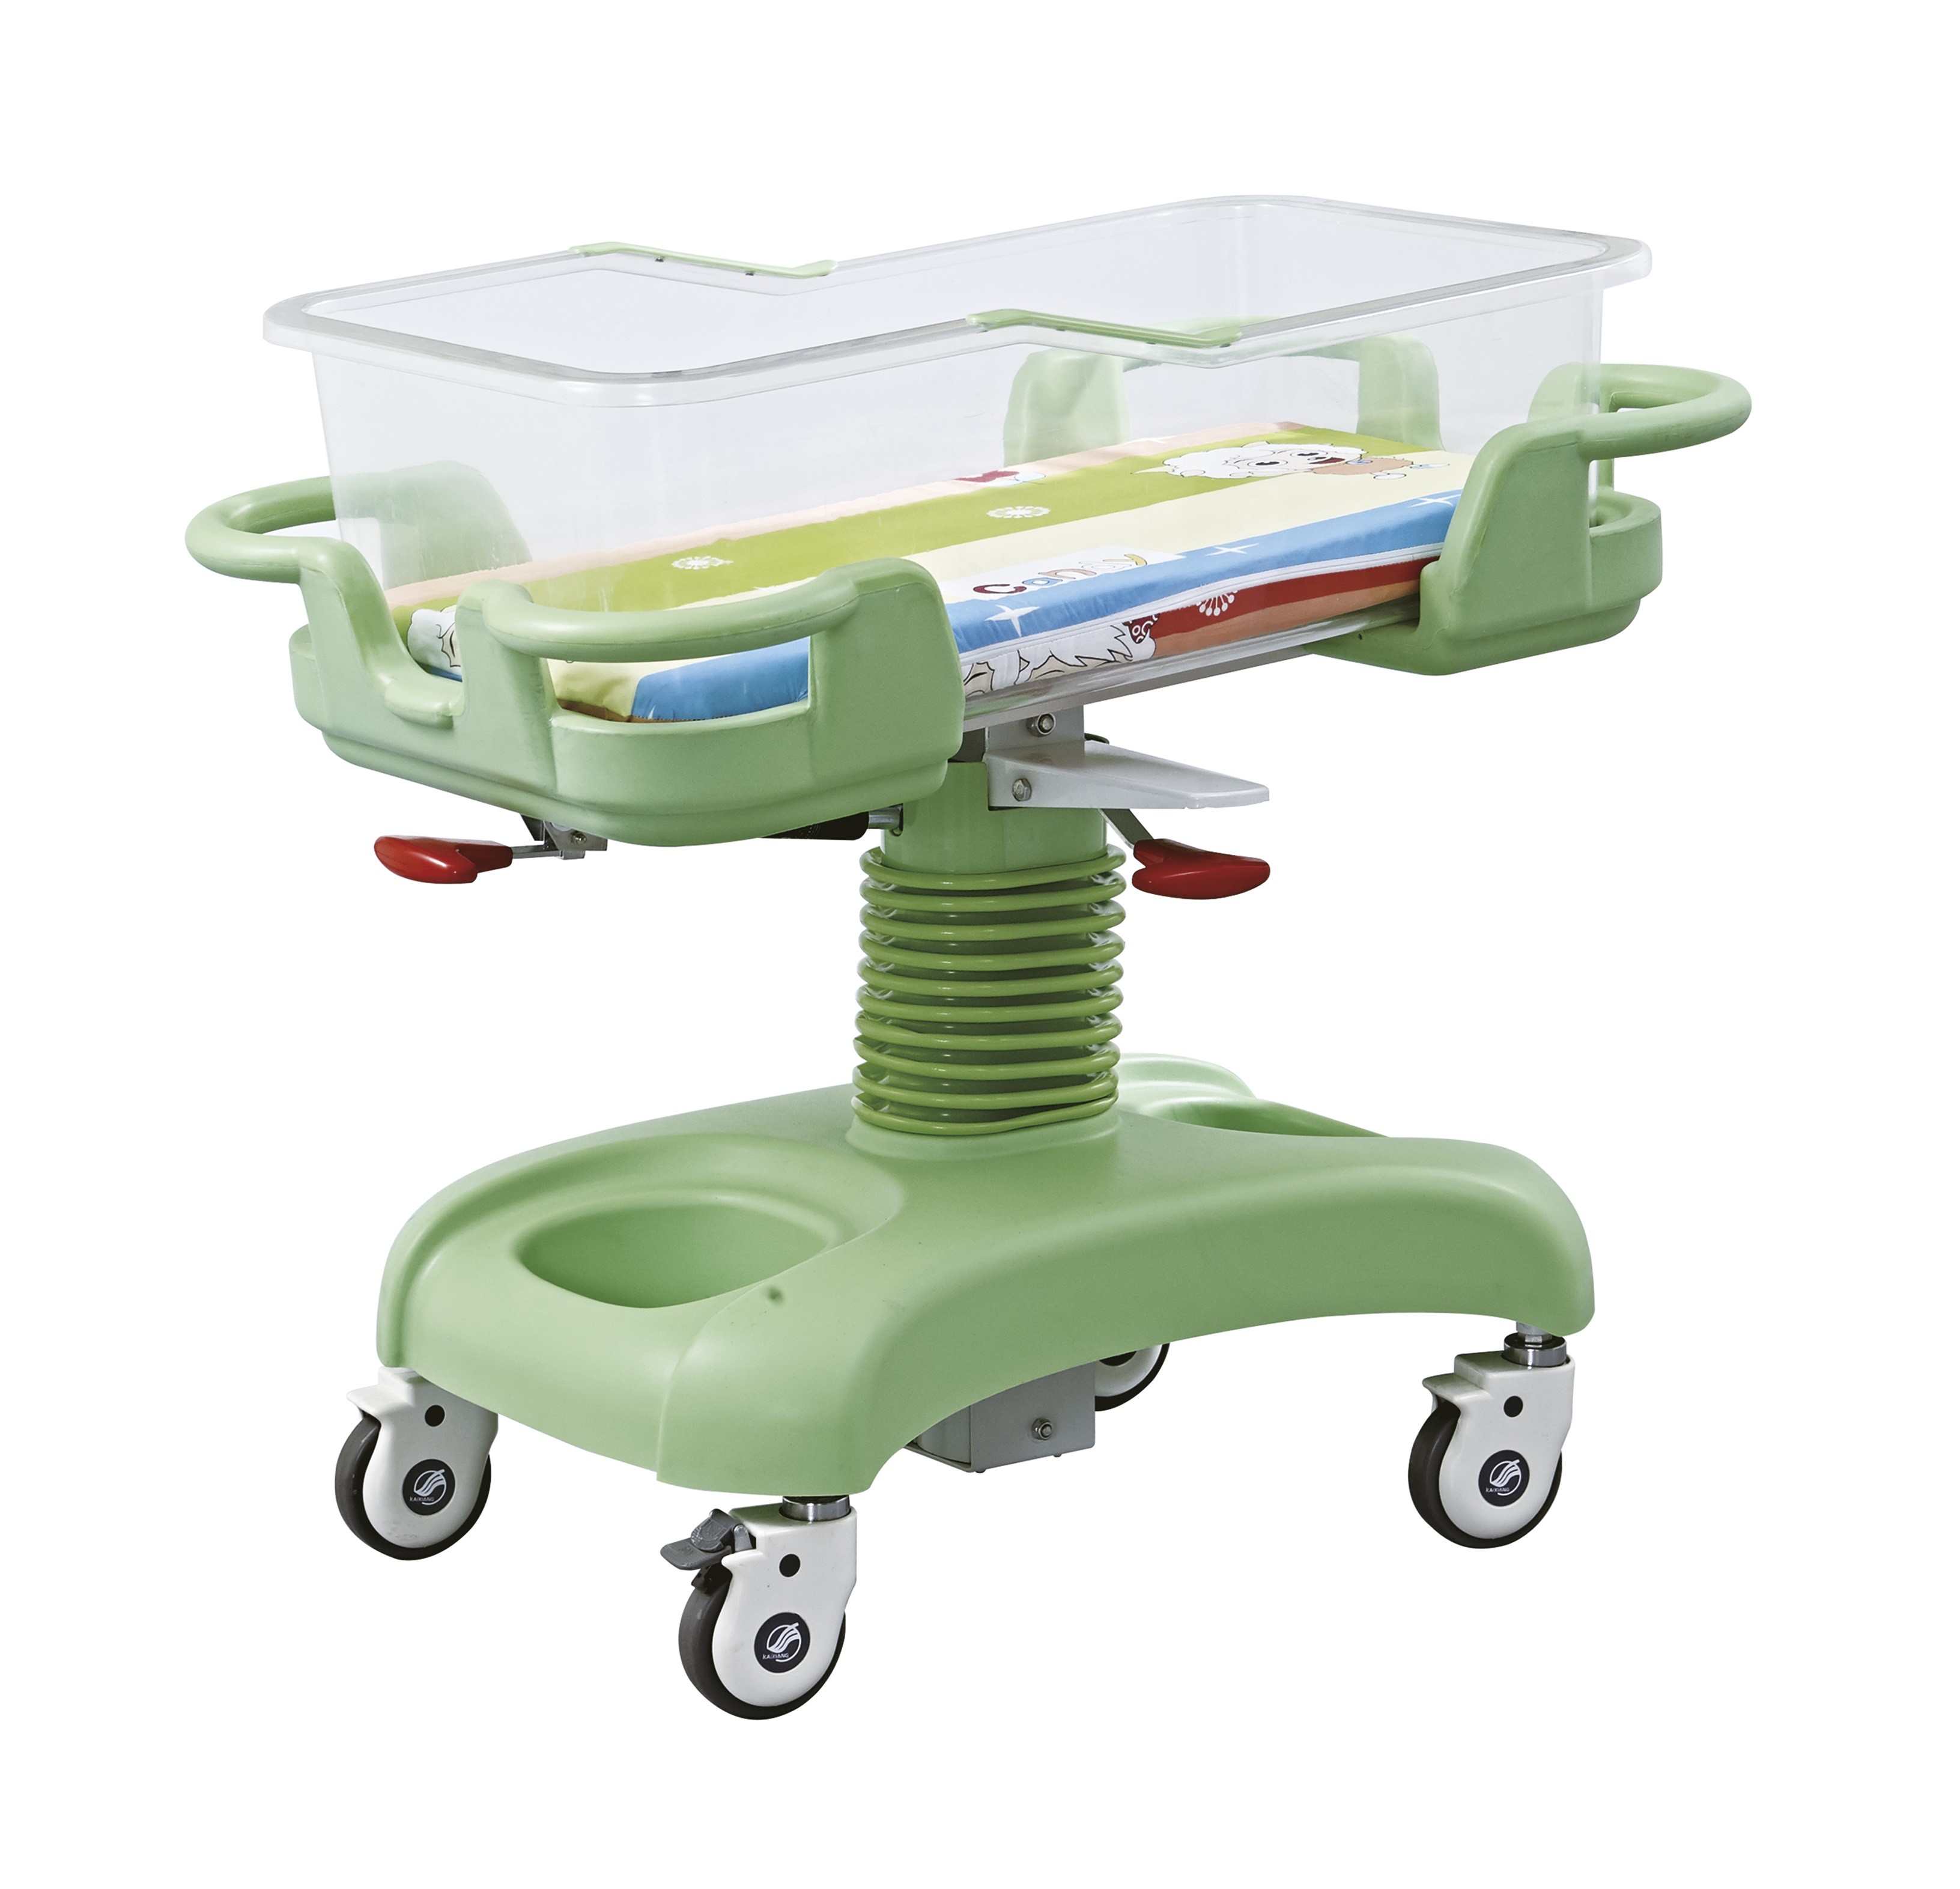  Diagonal Brake Hospital Baby Trolley With Transparent Plastic Basin Manufactures